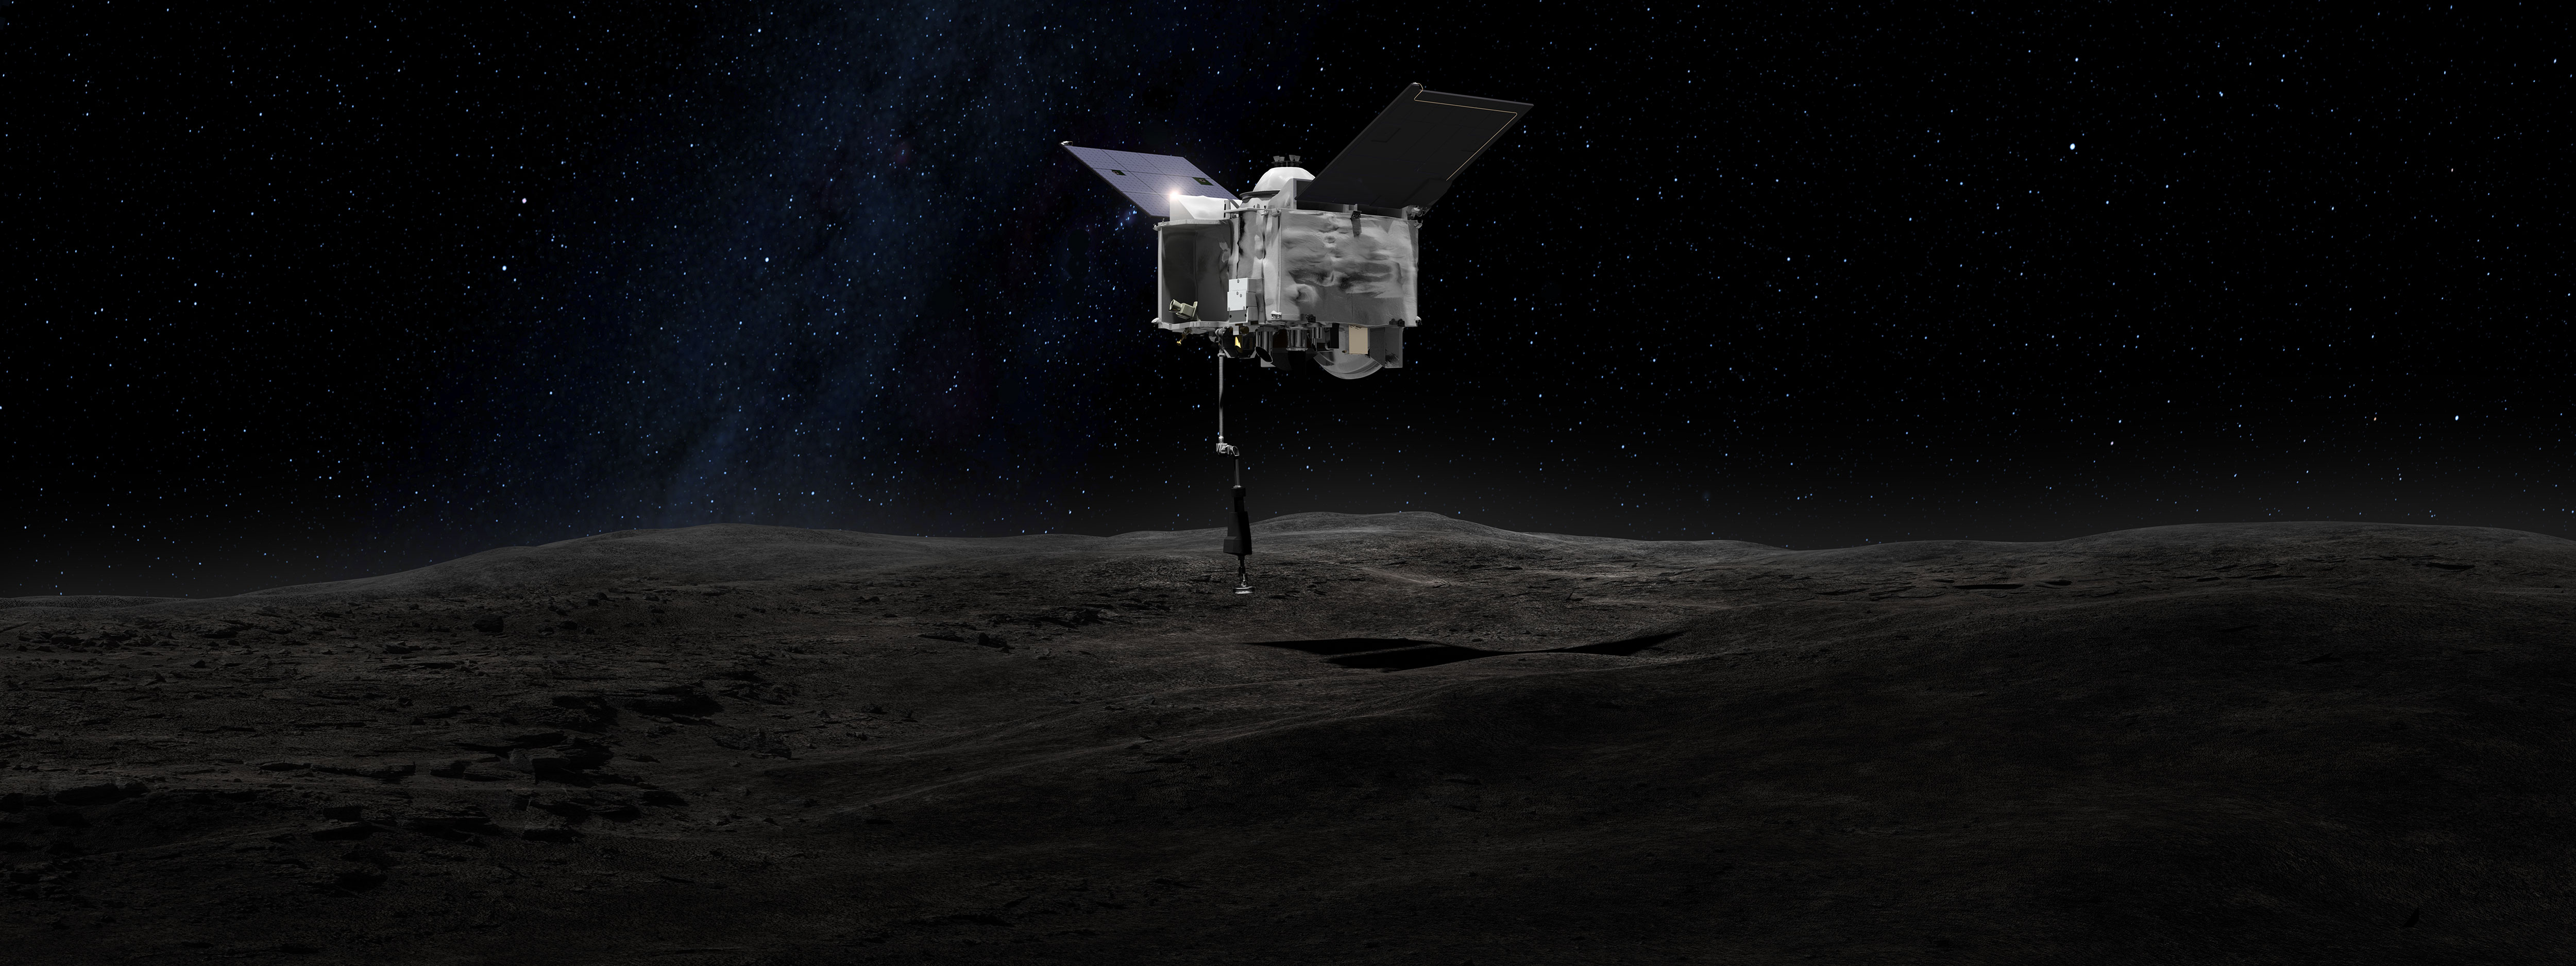 Artist’s concept shows the OSIRIS-REx spacecraft contacting the asteroid Bennu with the Touch-And-Go Sample Arm Mechanism. Credit: NASA’s Goddard Space Flight Center